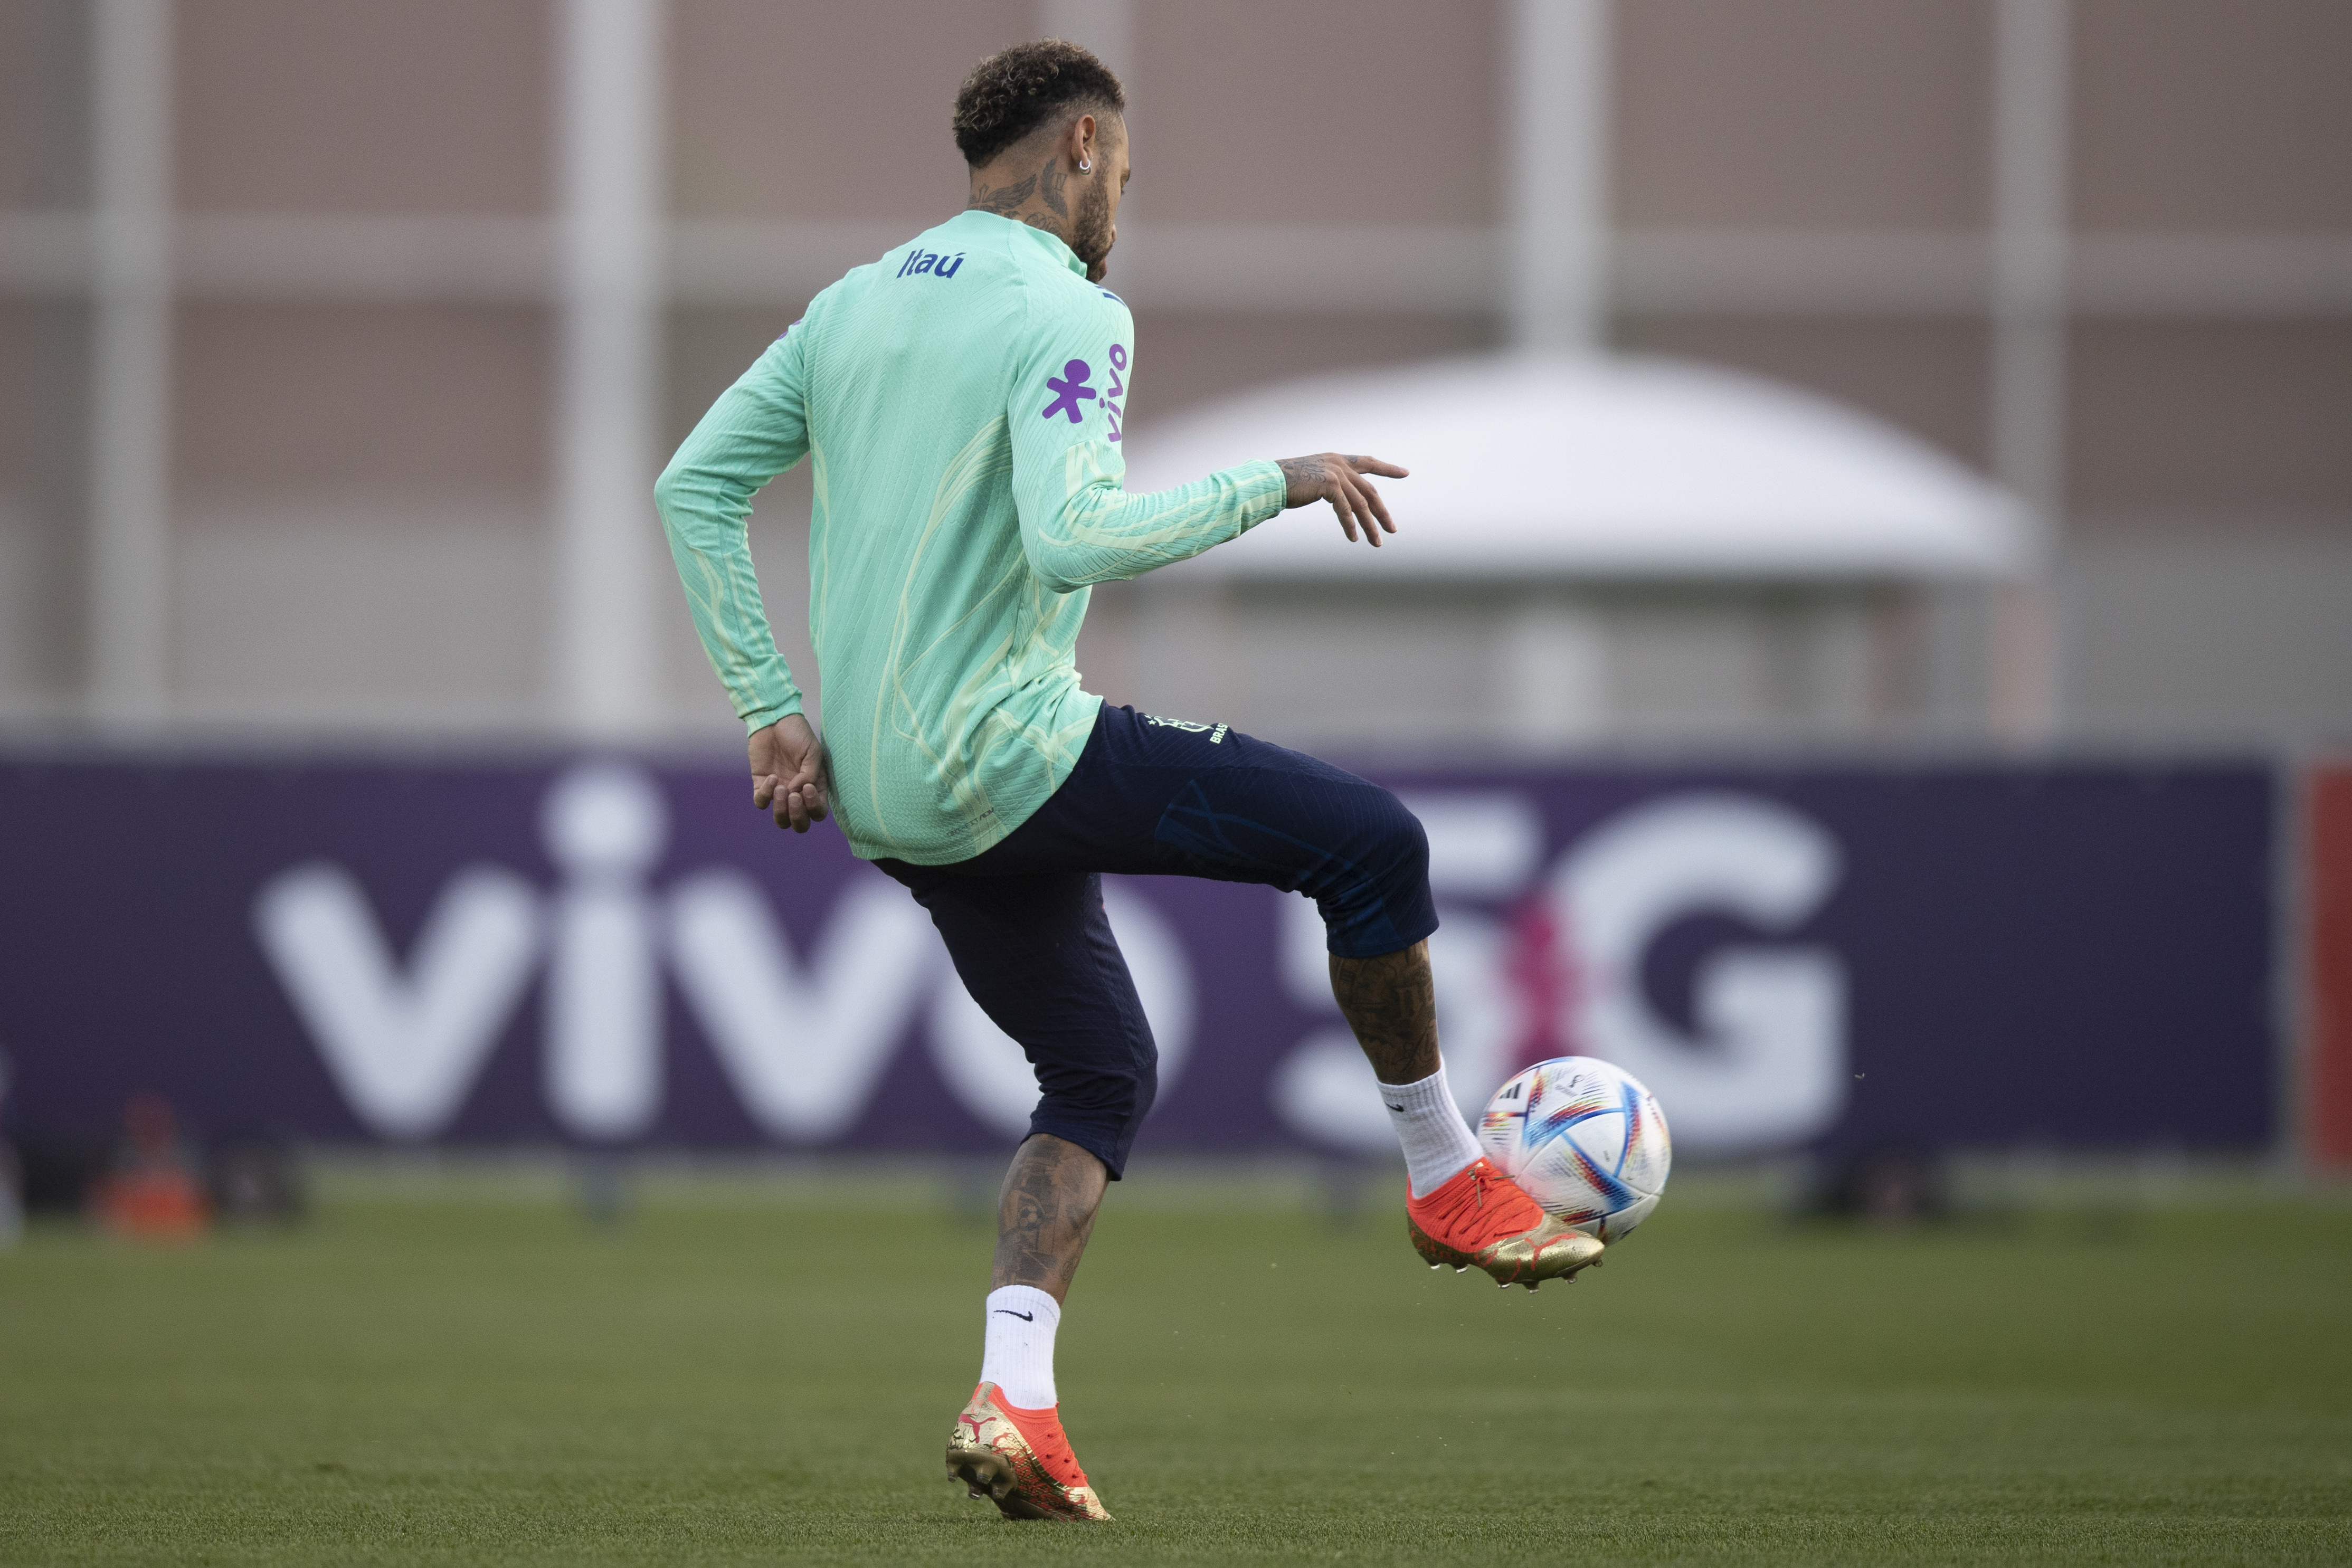 Neymar Jr is back training with the ball before the match against